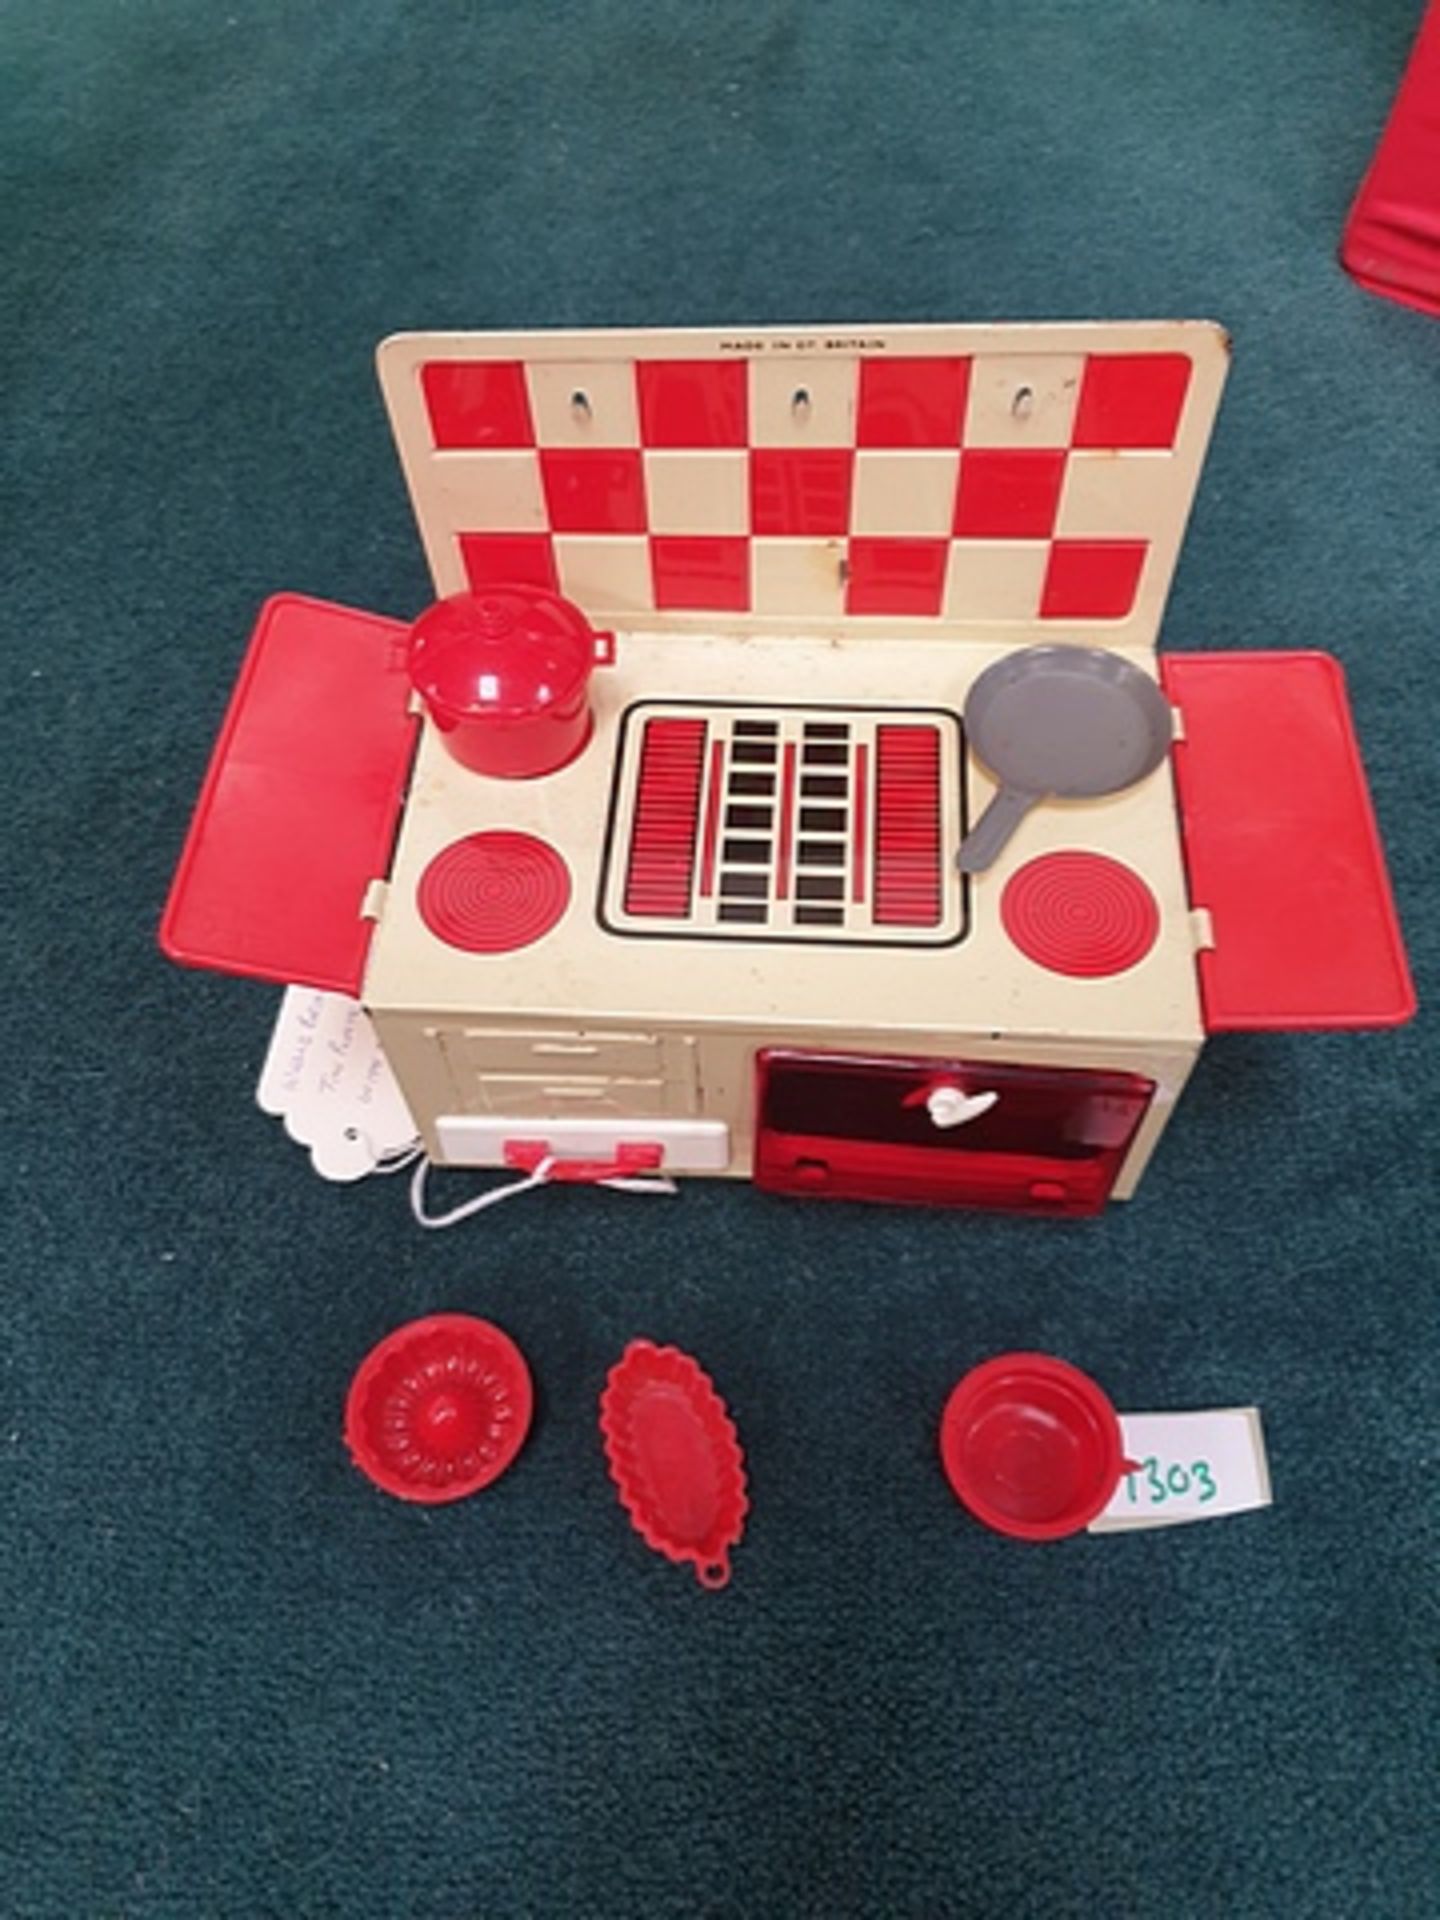 Wells Brimtoy Junior Cooker Model 221 With Accessories Circa 1950s Complete With Box